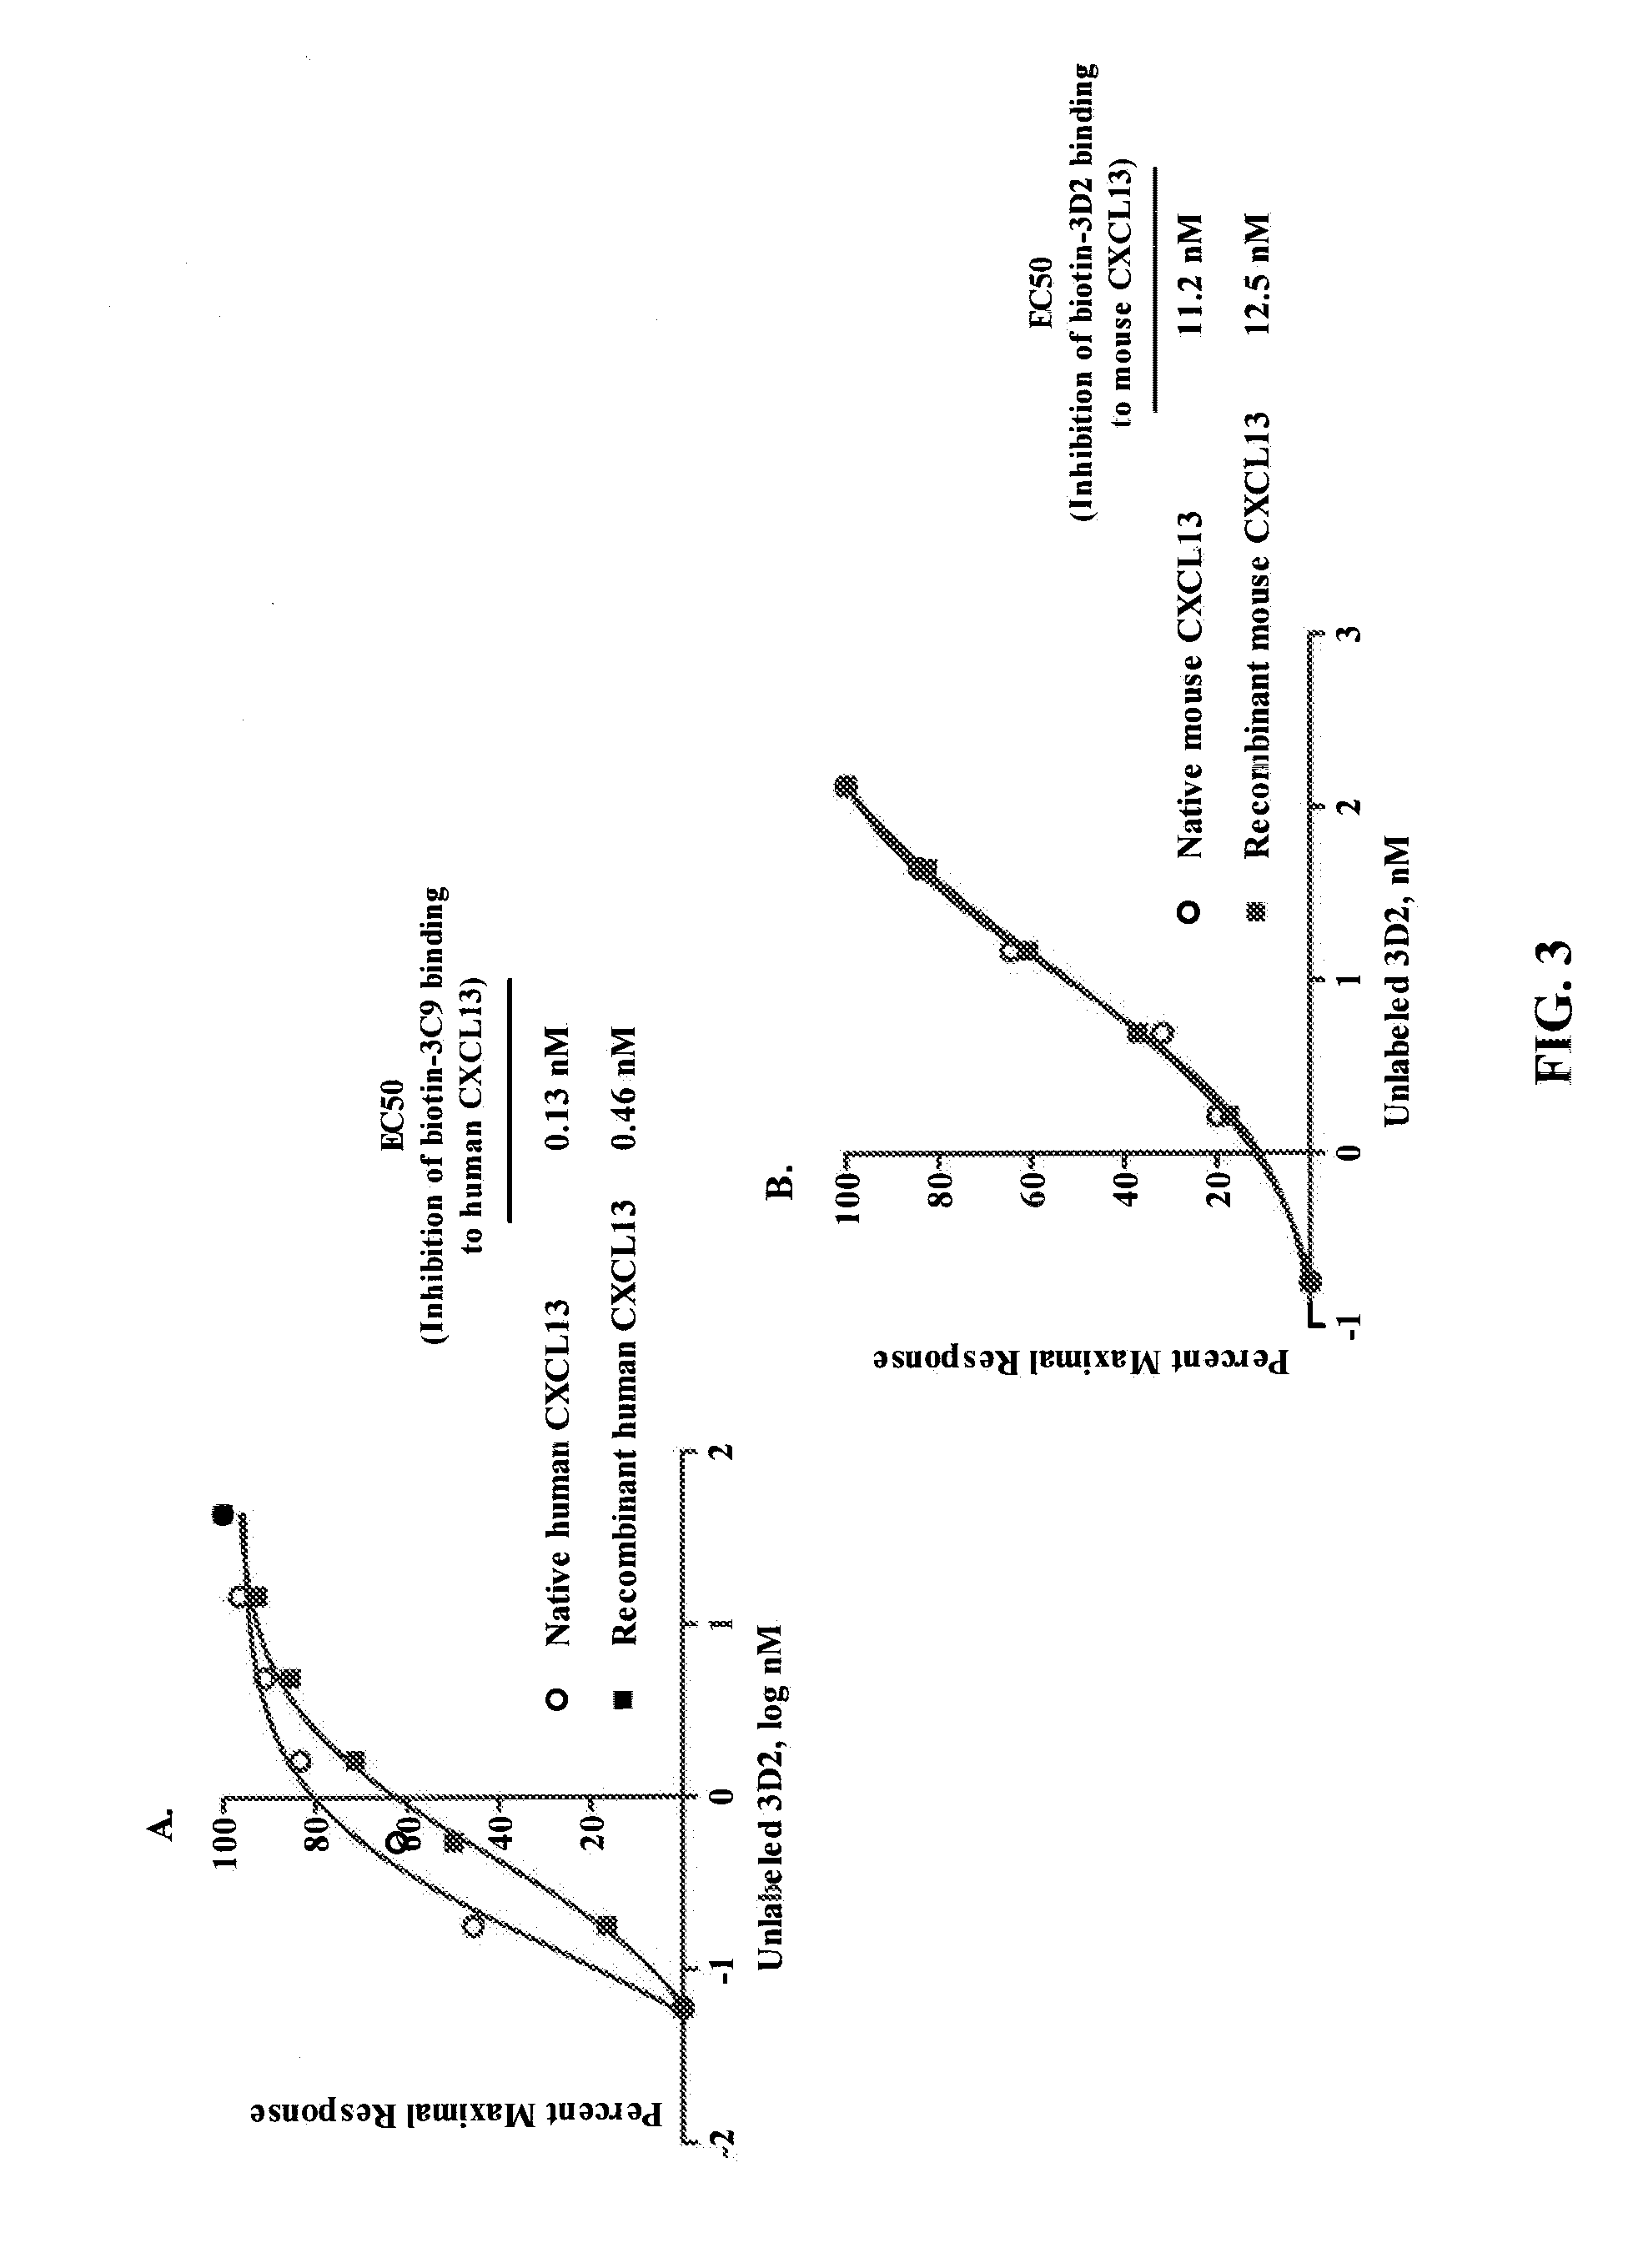 Anti-cxcl13 antibodies and methods of using the same